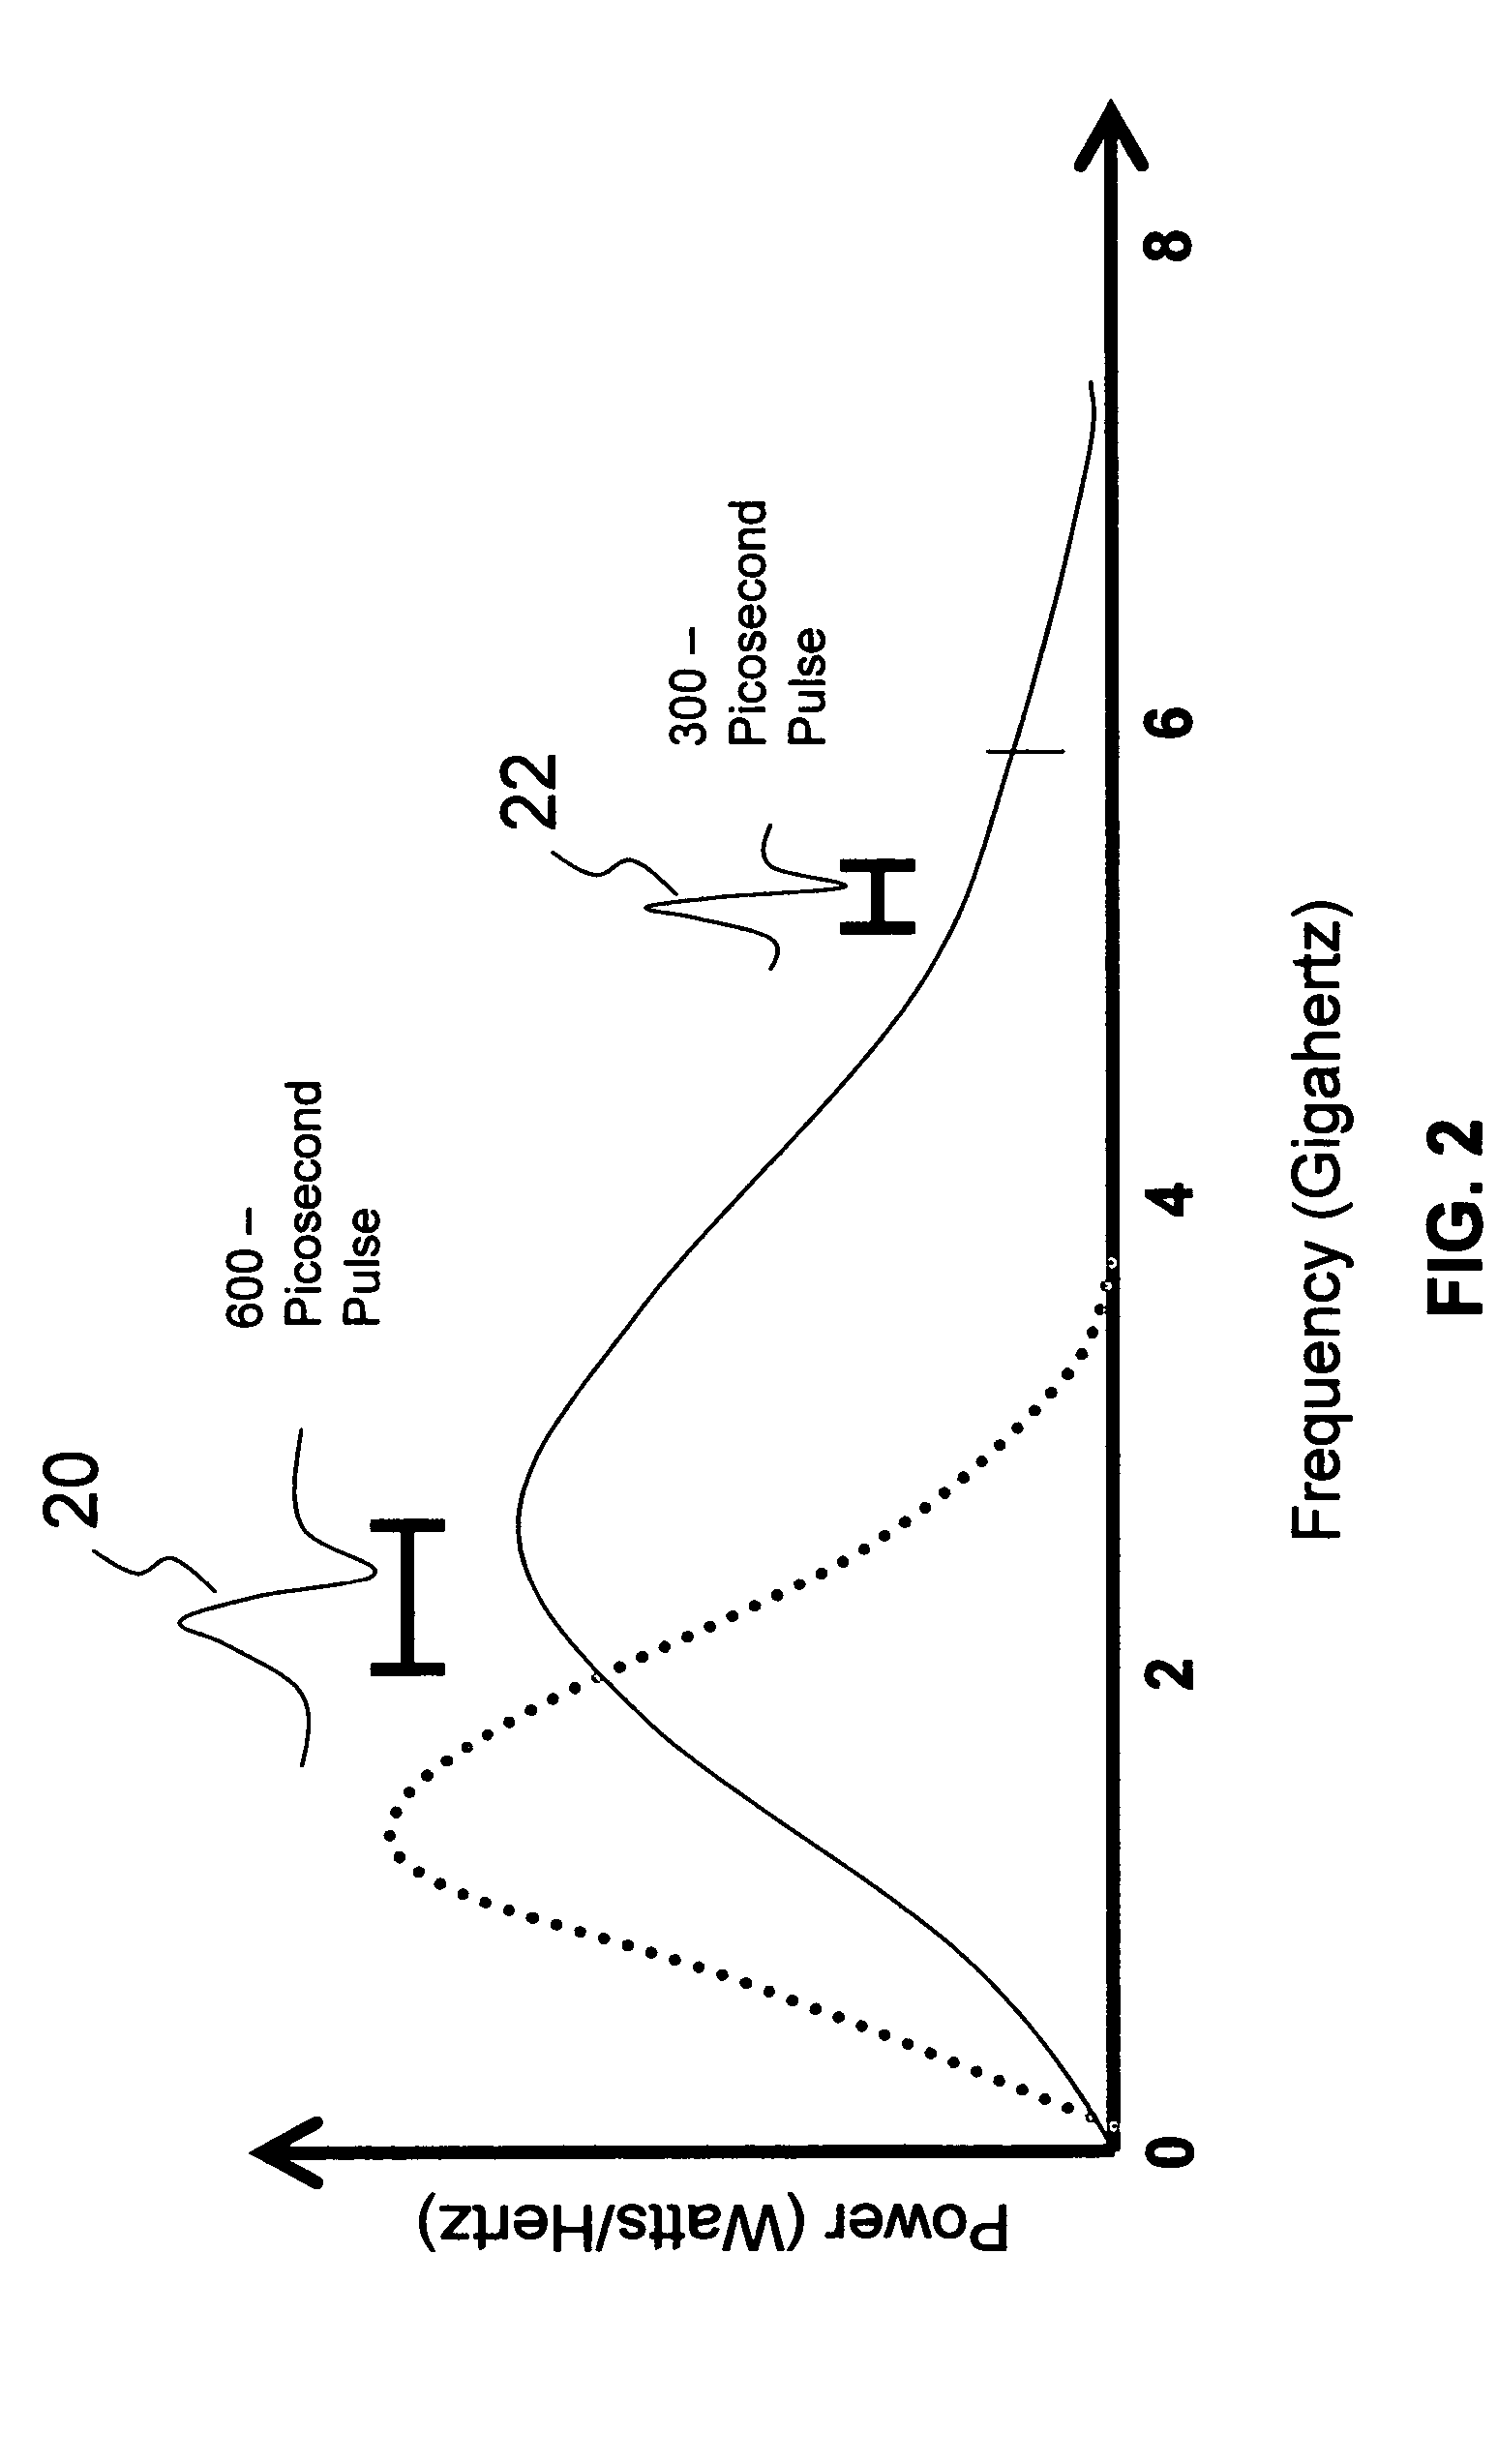 System and method for in-situ integrity and performance monitoring of operating metallic and non-metallic natural gas transmission and delivery pipelines using ultra wideband point-to point and point-to point and point-to-multipoint communication